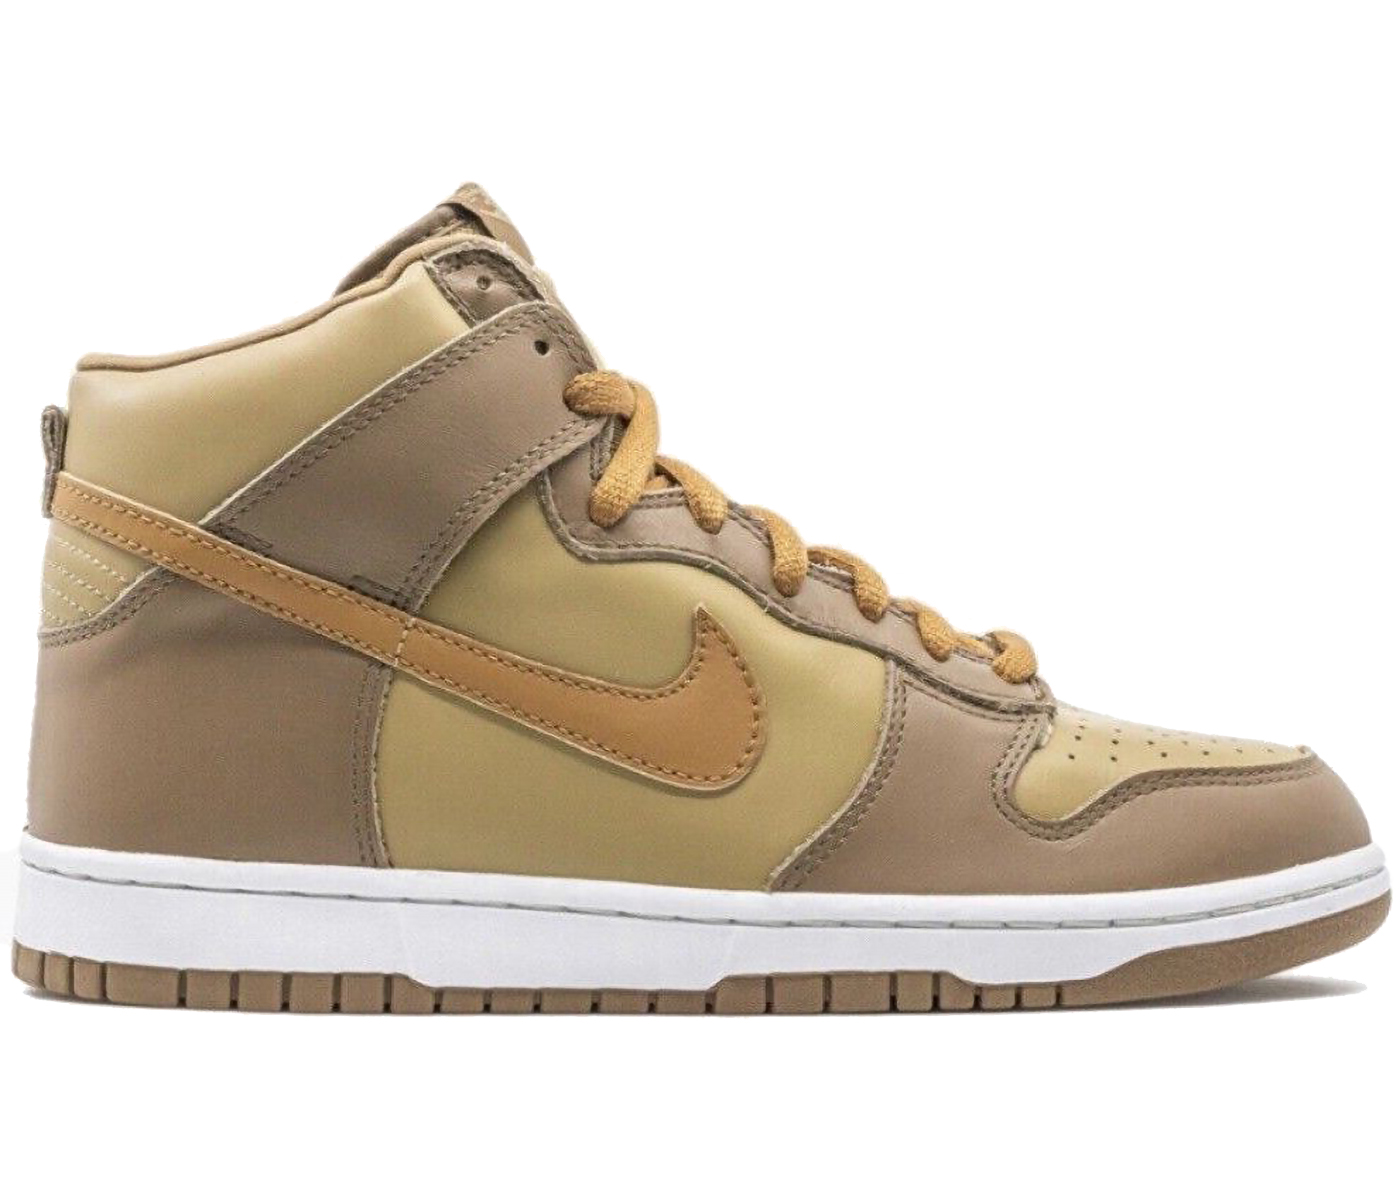 Nike Dunk High Hay Maple Taupe